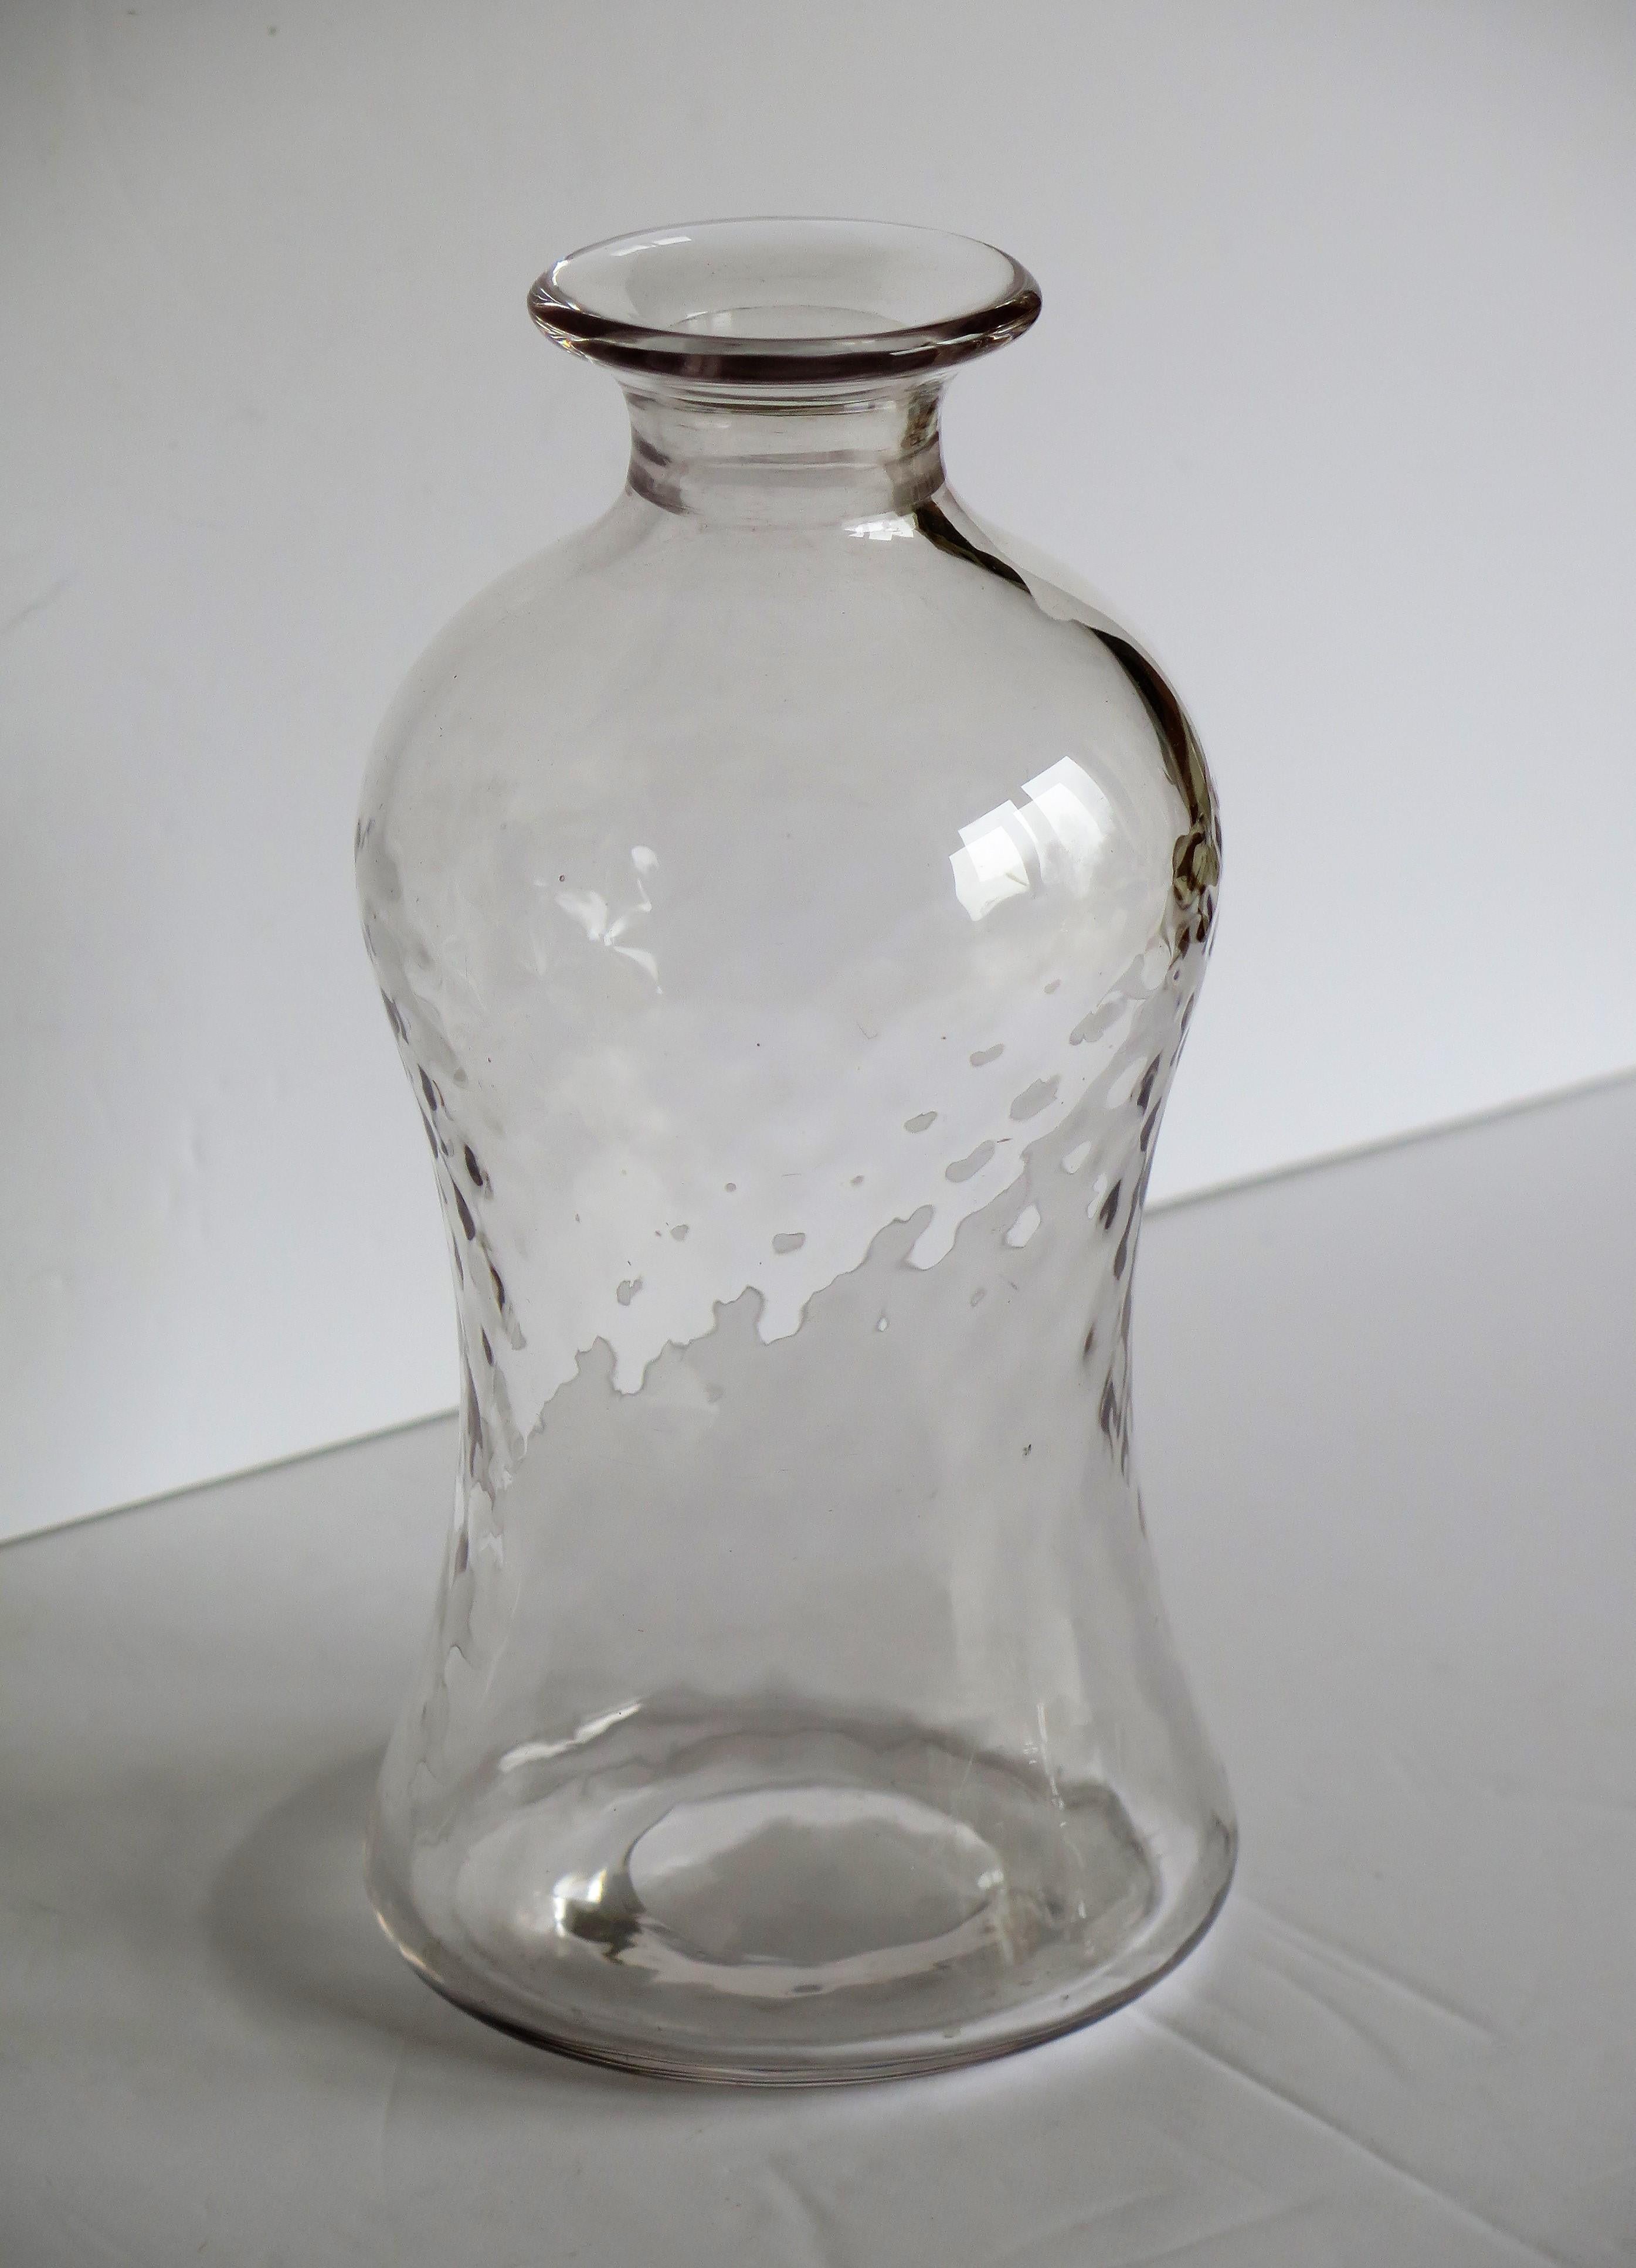 This is a good cut-glass or crystal decanter or wine carafe, hand blown with a waisted shape and dimple moulded decoration with its original mushroom stopper, made of heavy lead glass, and dating to Edwardian England, circa 1900.

This hand blown